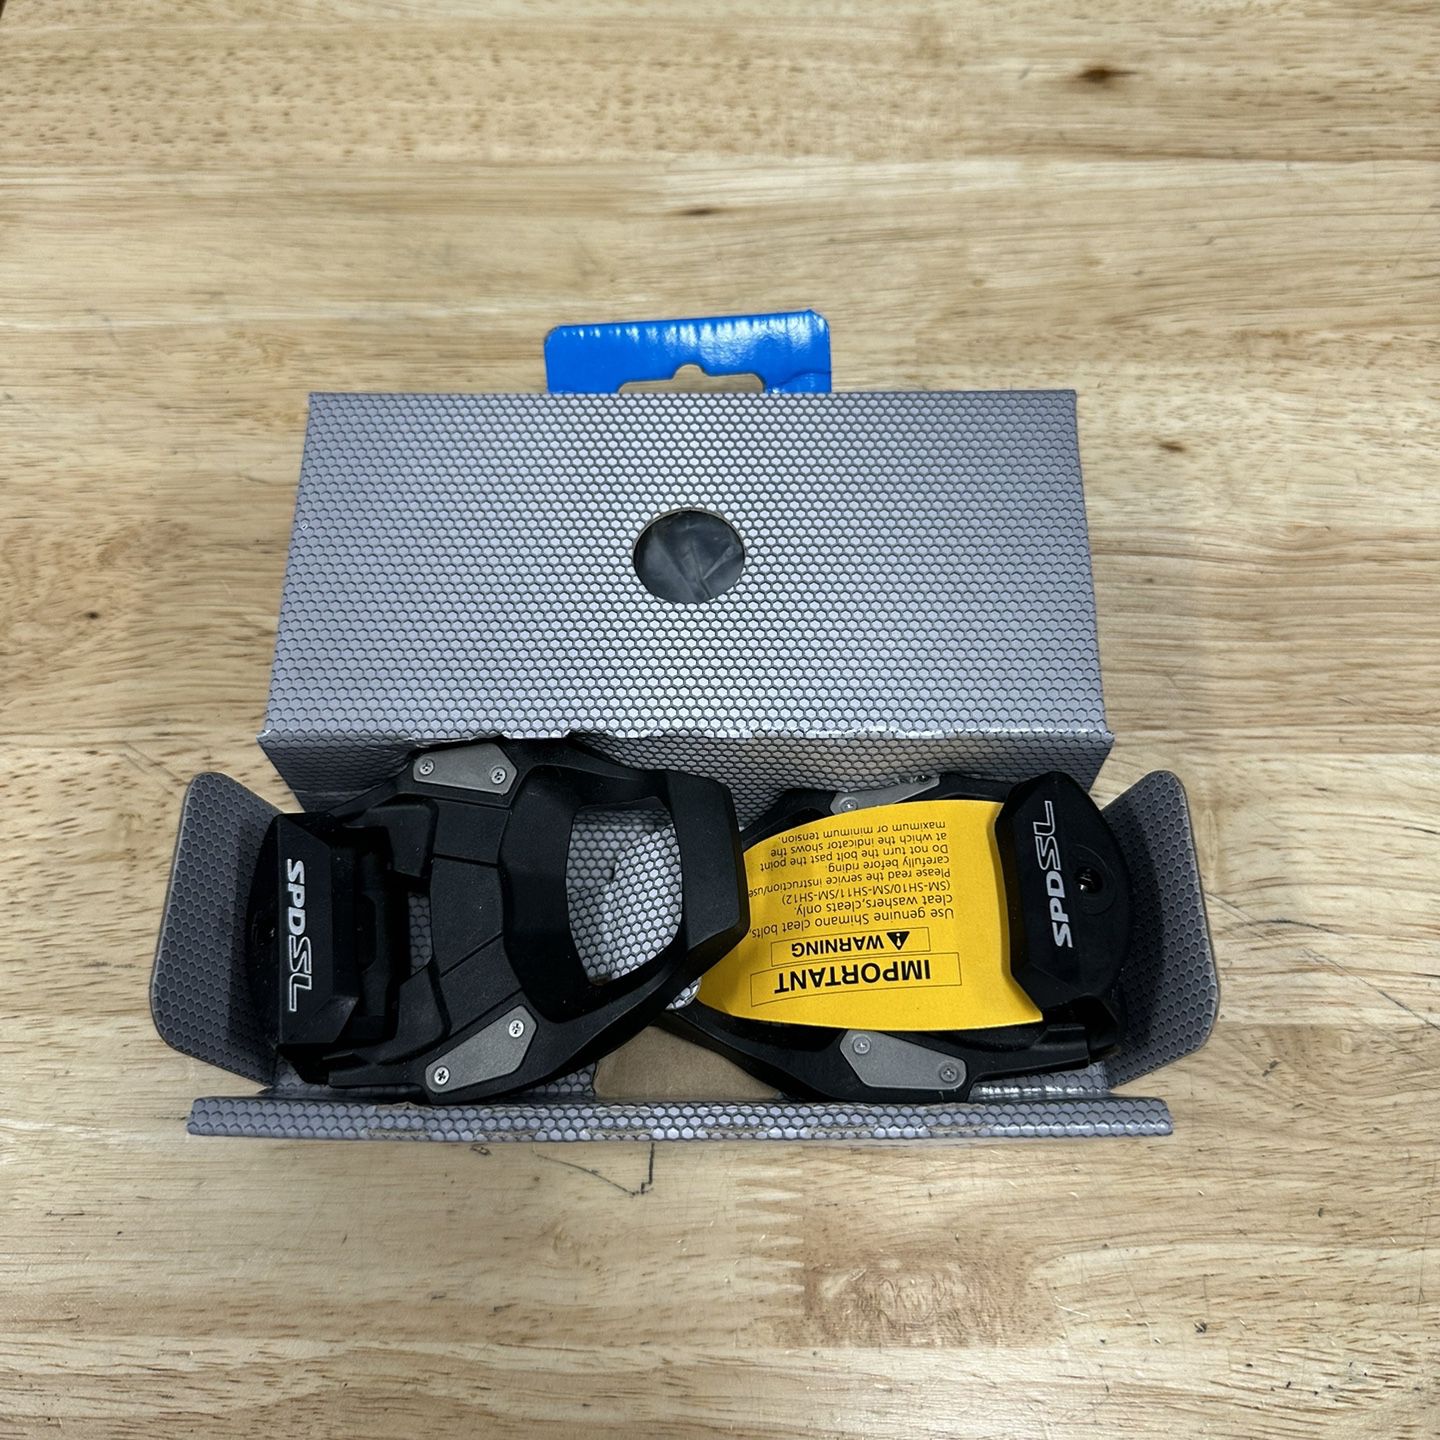 Shimano PD-RD500 SPD Pedal For Sale.